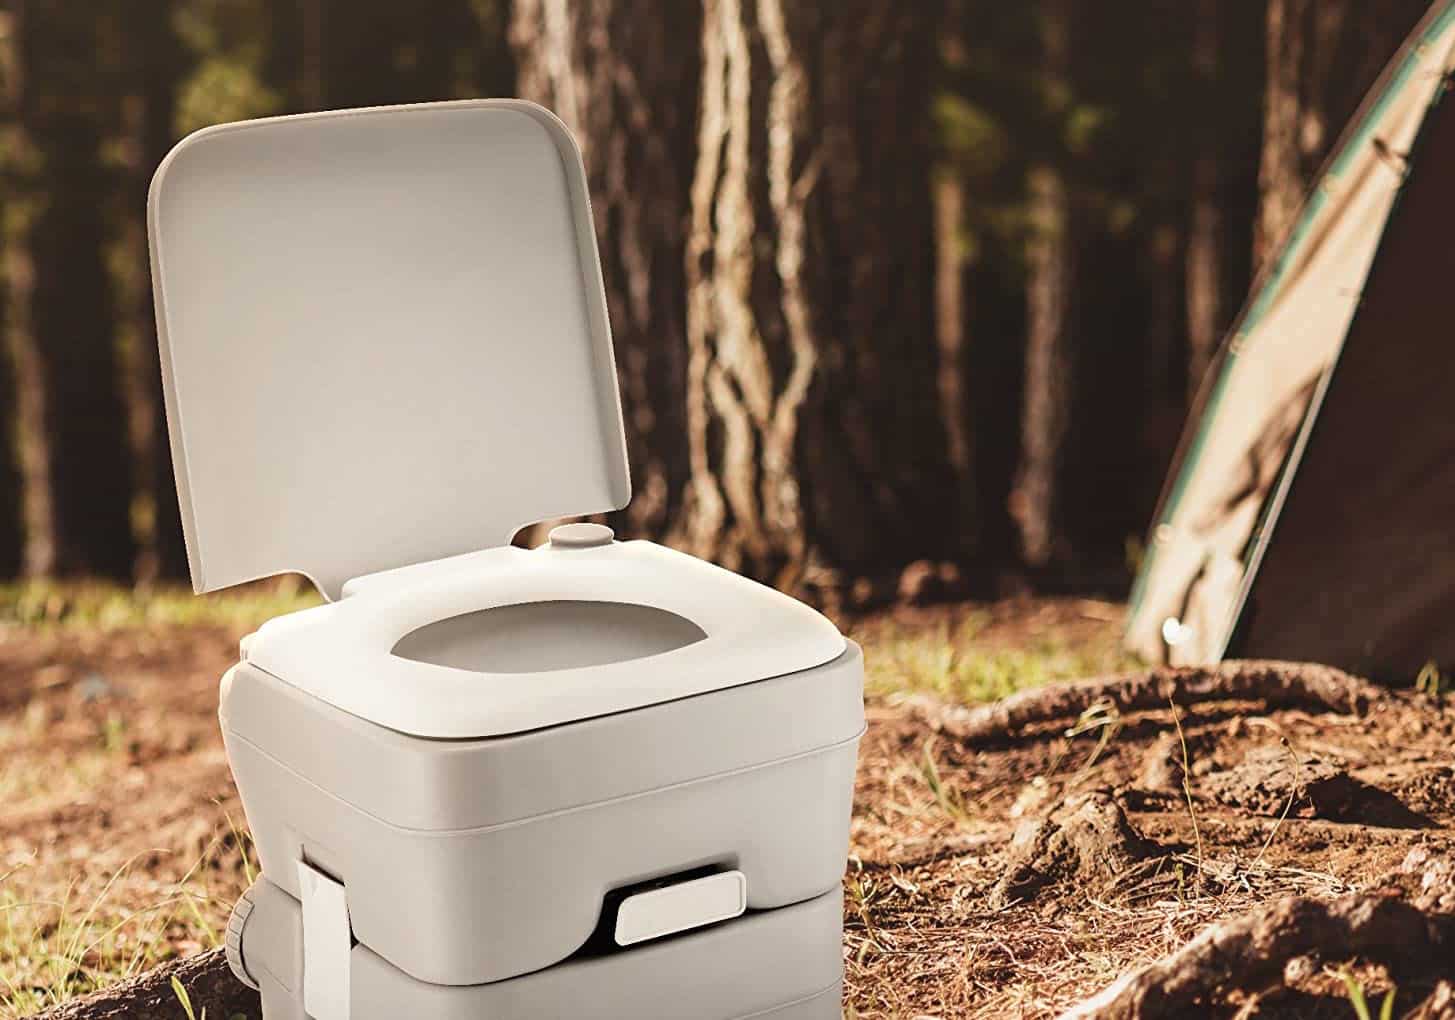 Portable Camp Toilets – What Options Do You Have?